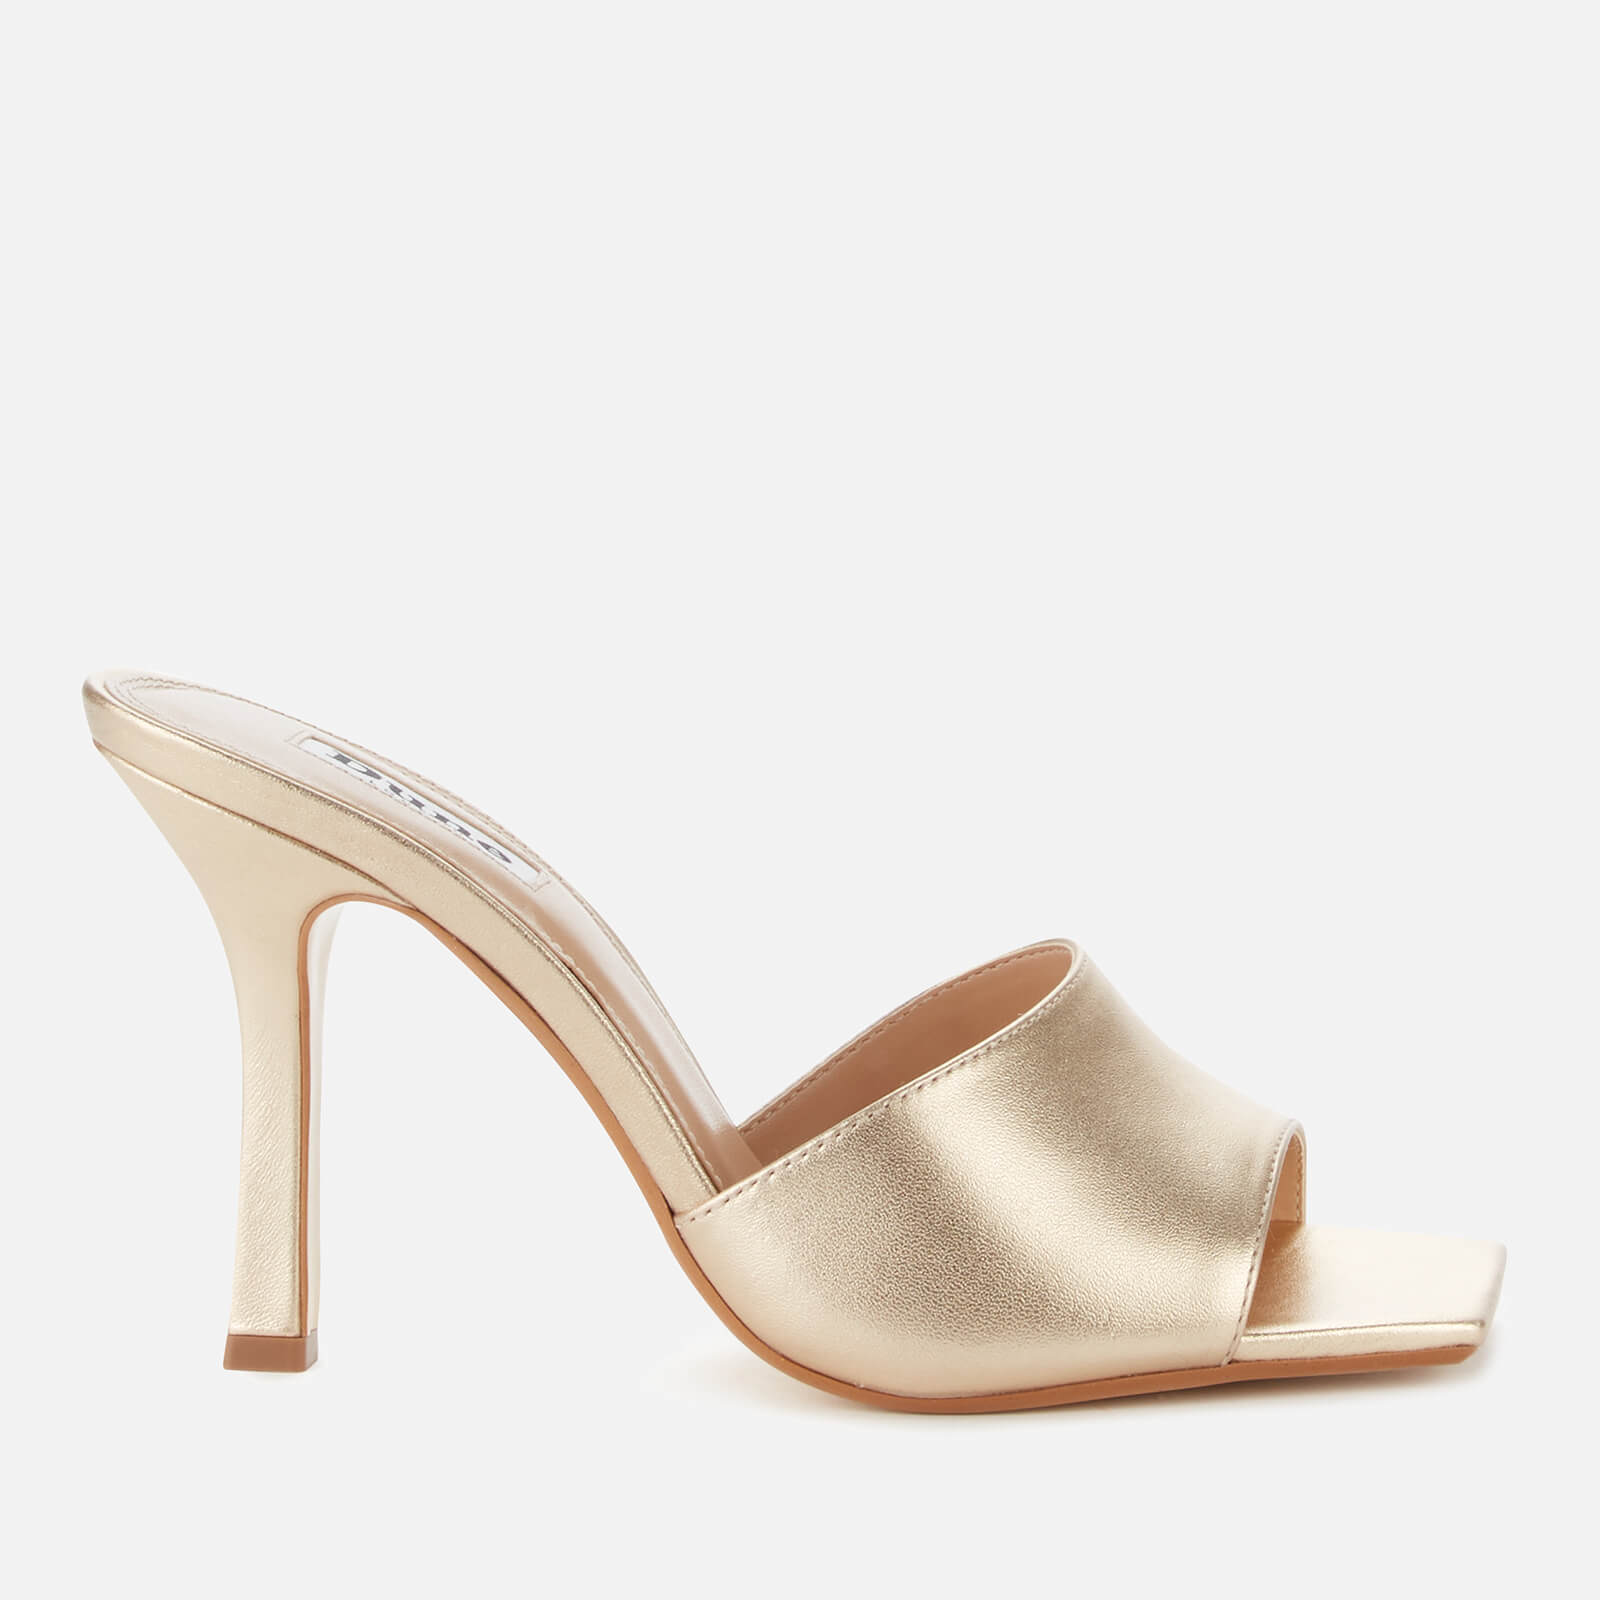 Mantra Leather Heeled Mules - Gold 